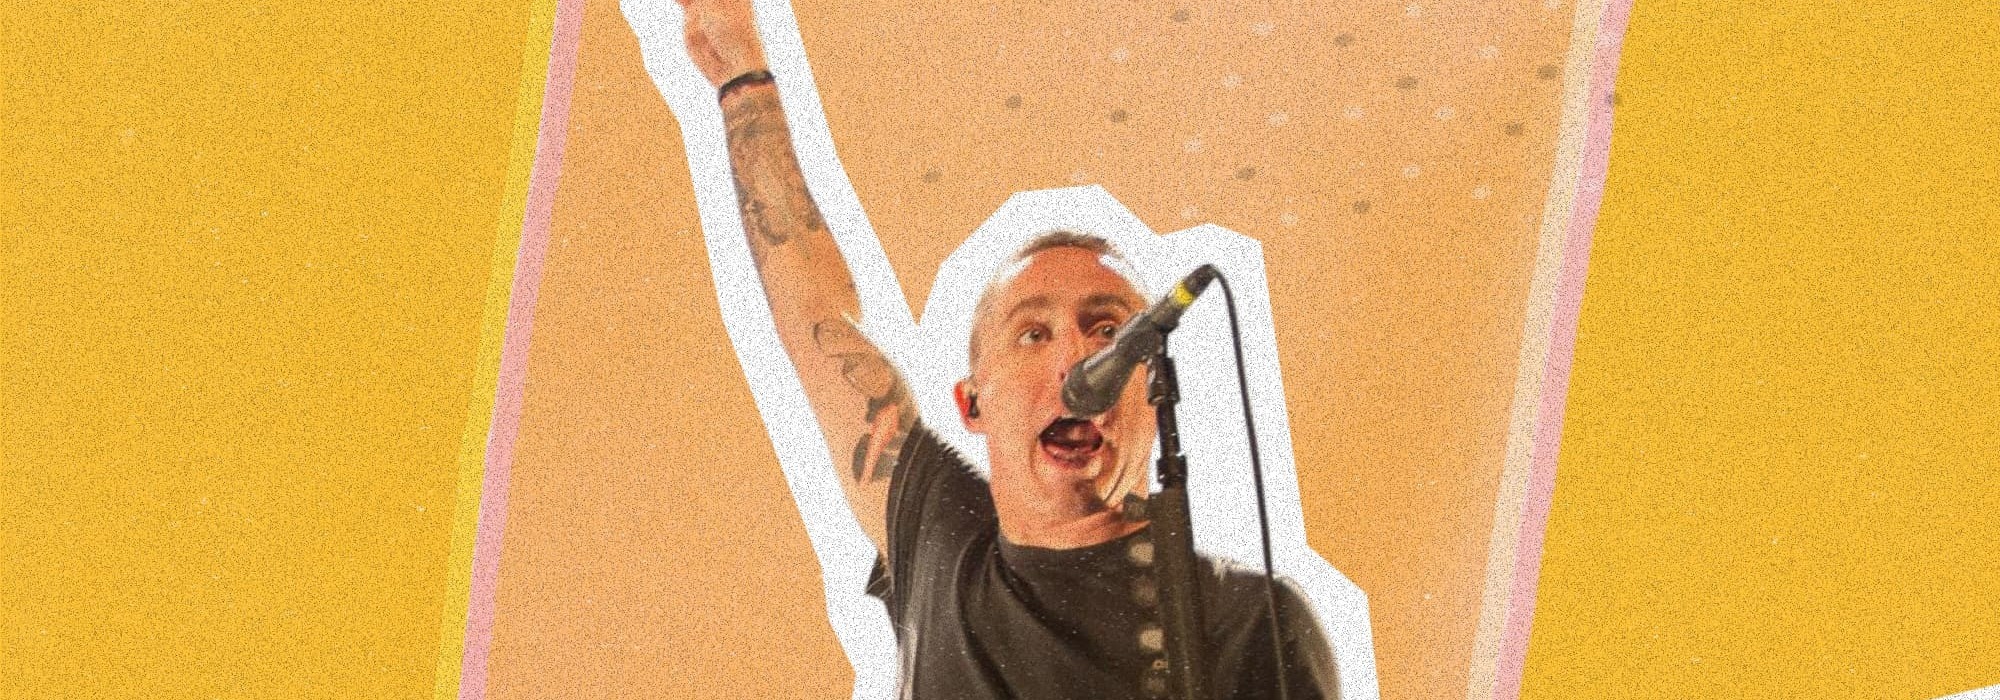 A Yellowcard live event